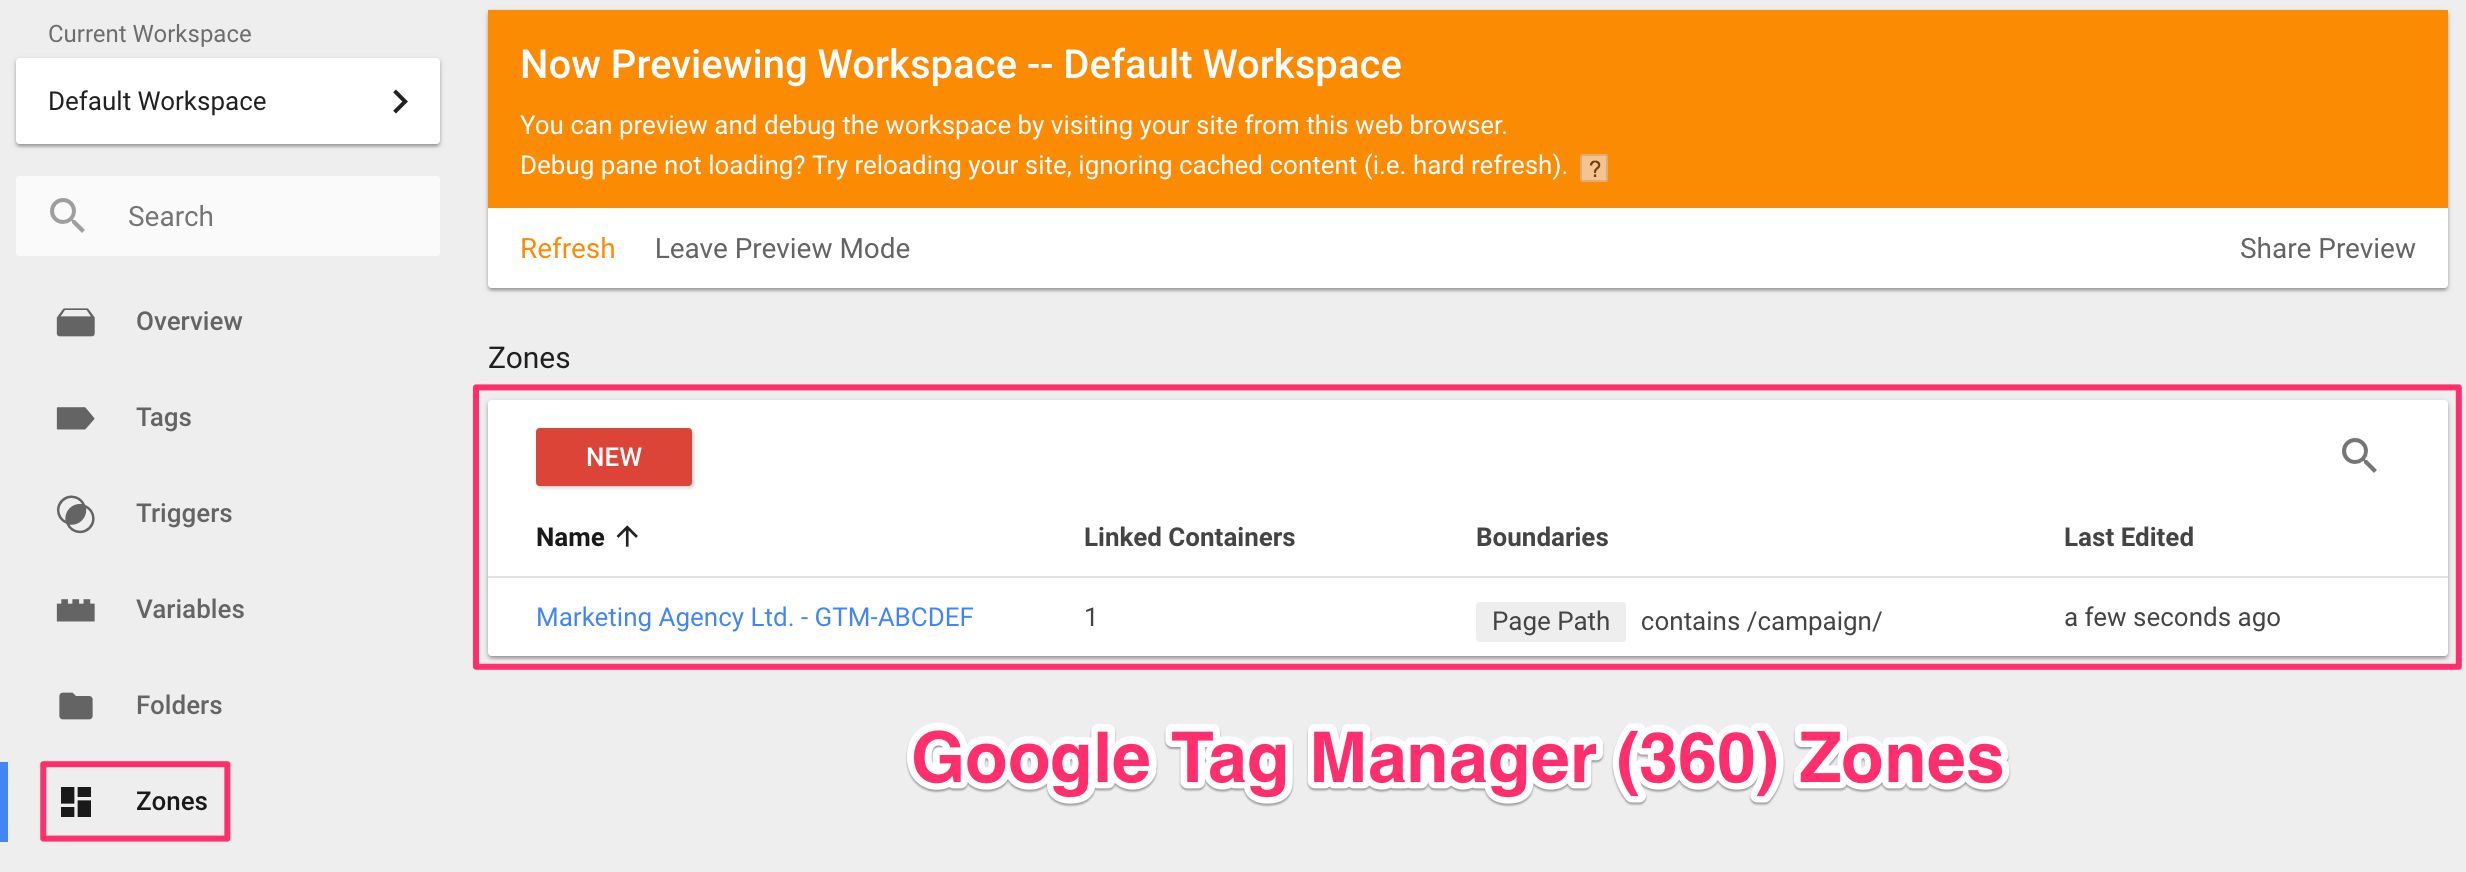 zones in google tag manager 360